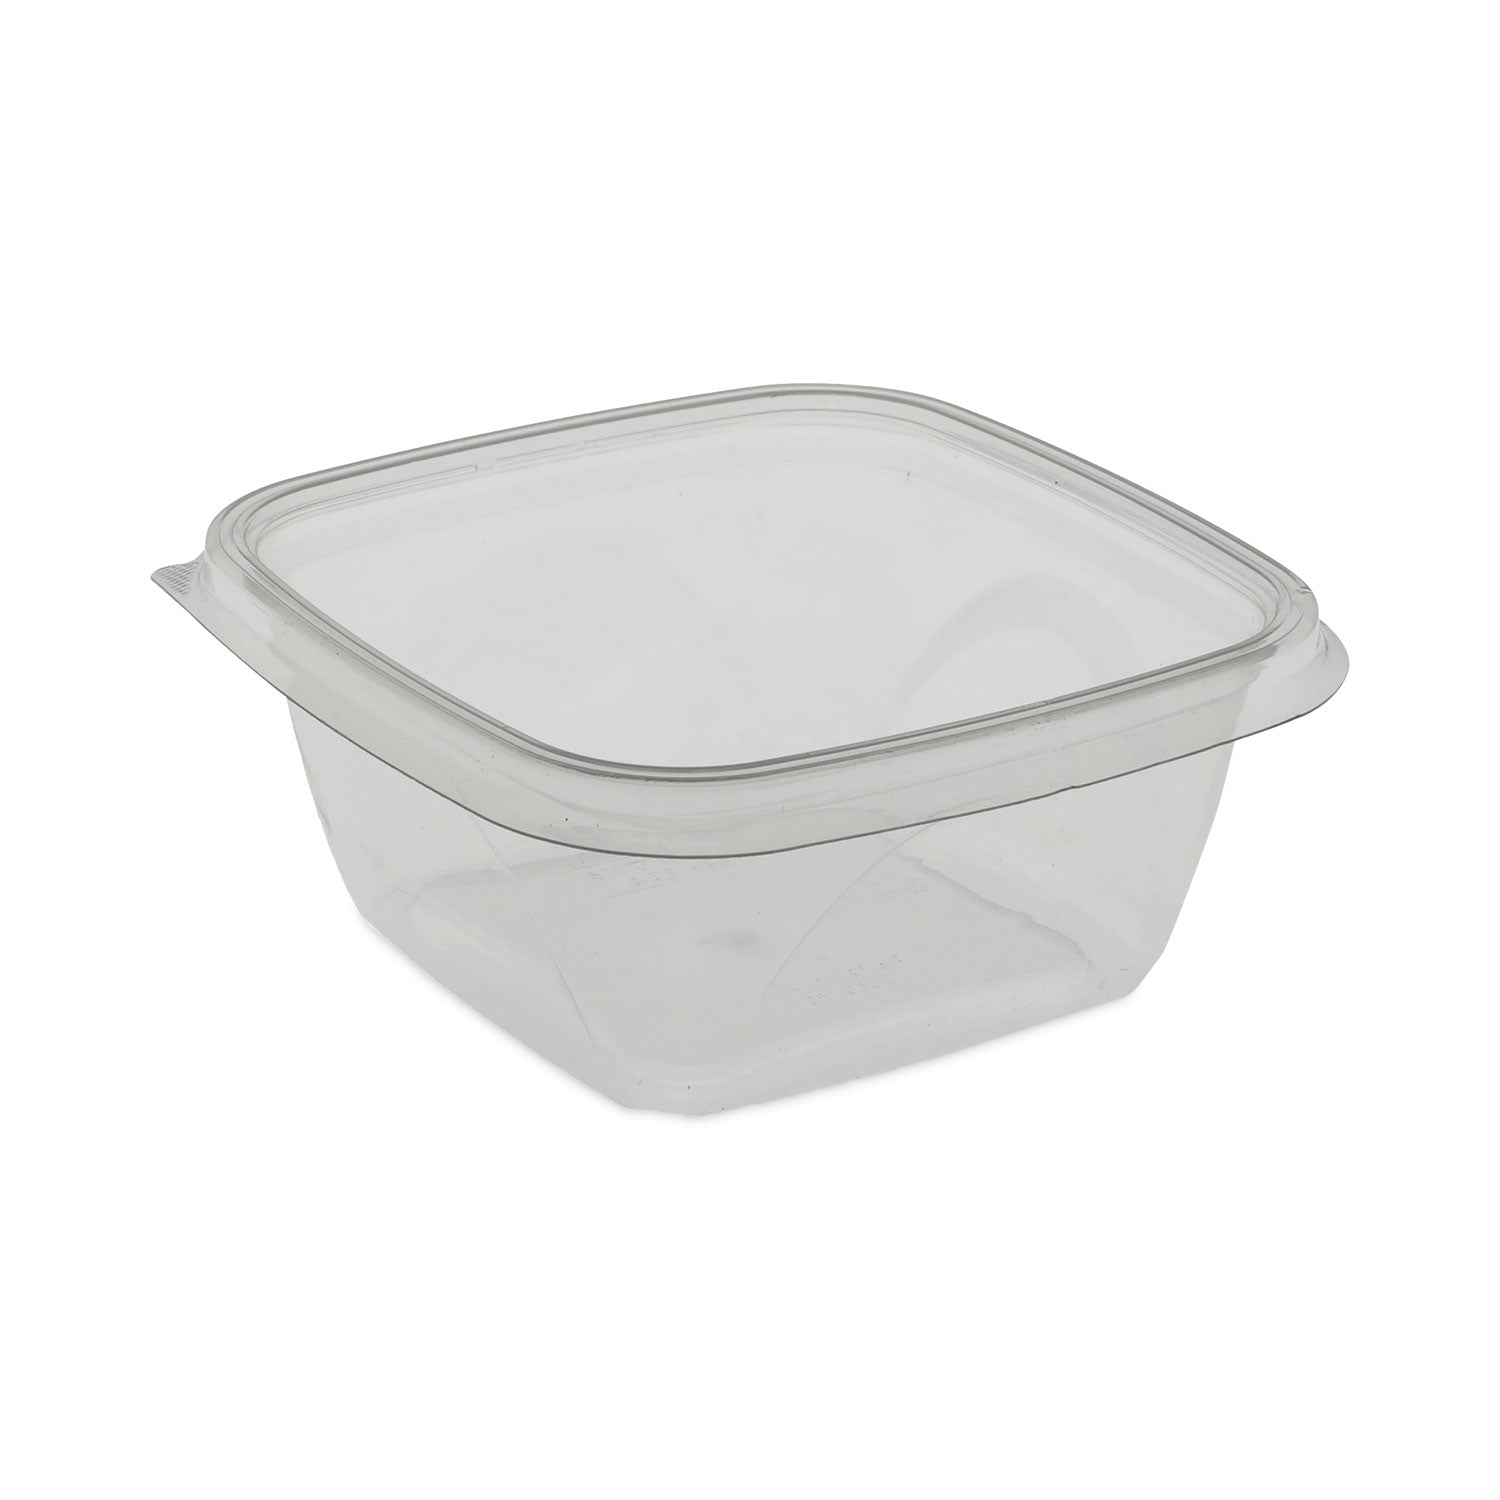 earthchoice-square-recycled-bowl-16-oz-5-x-5-x-175-clear-plastic-504-carton_pctsac0516 - 1